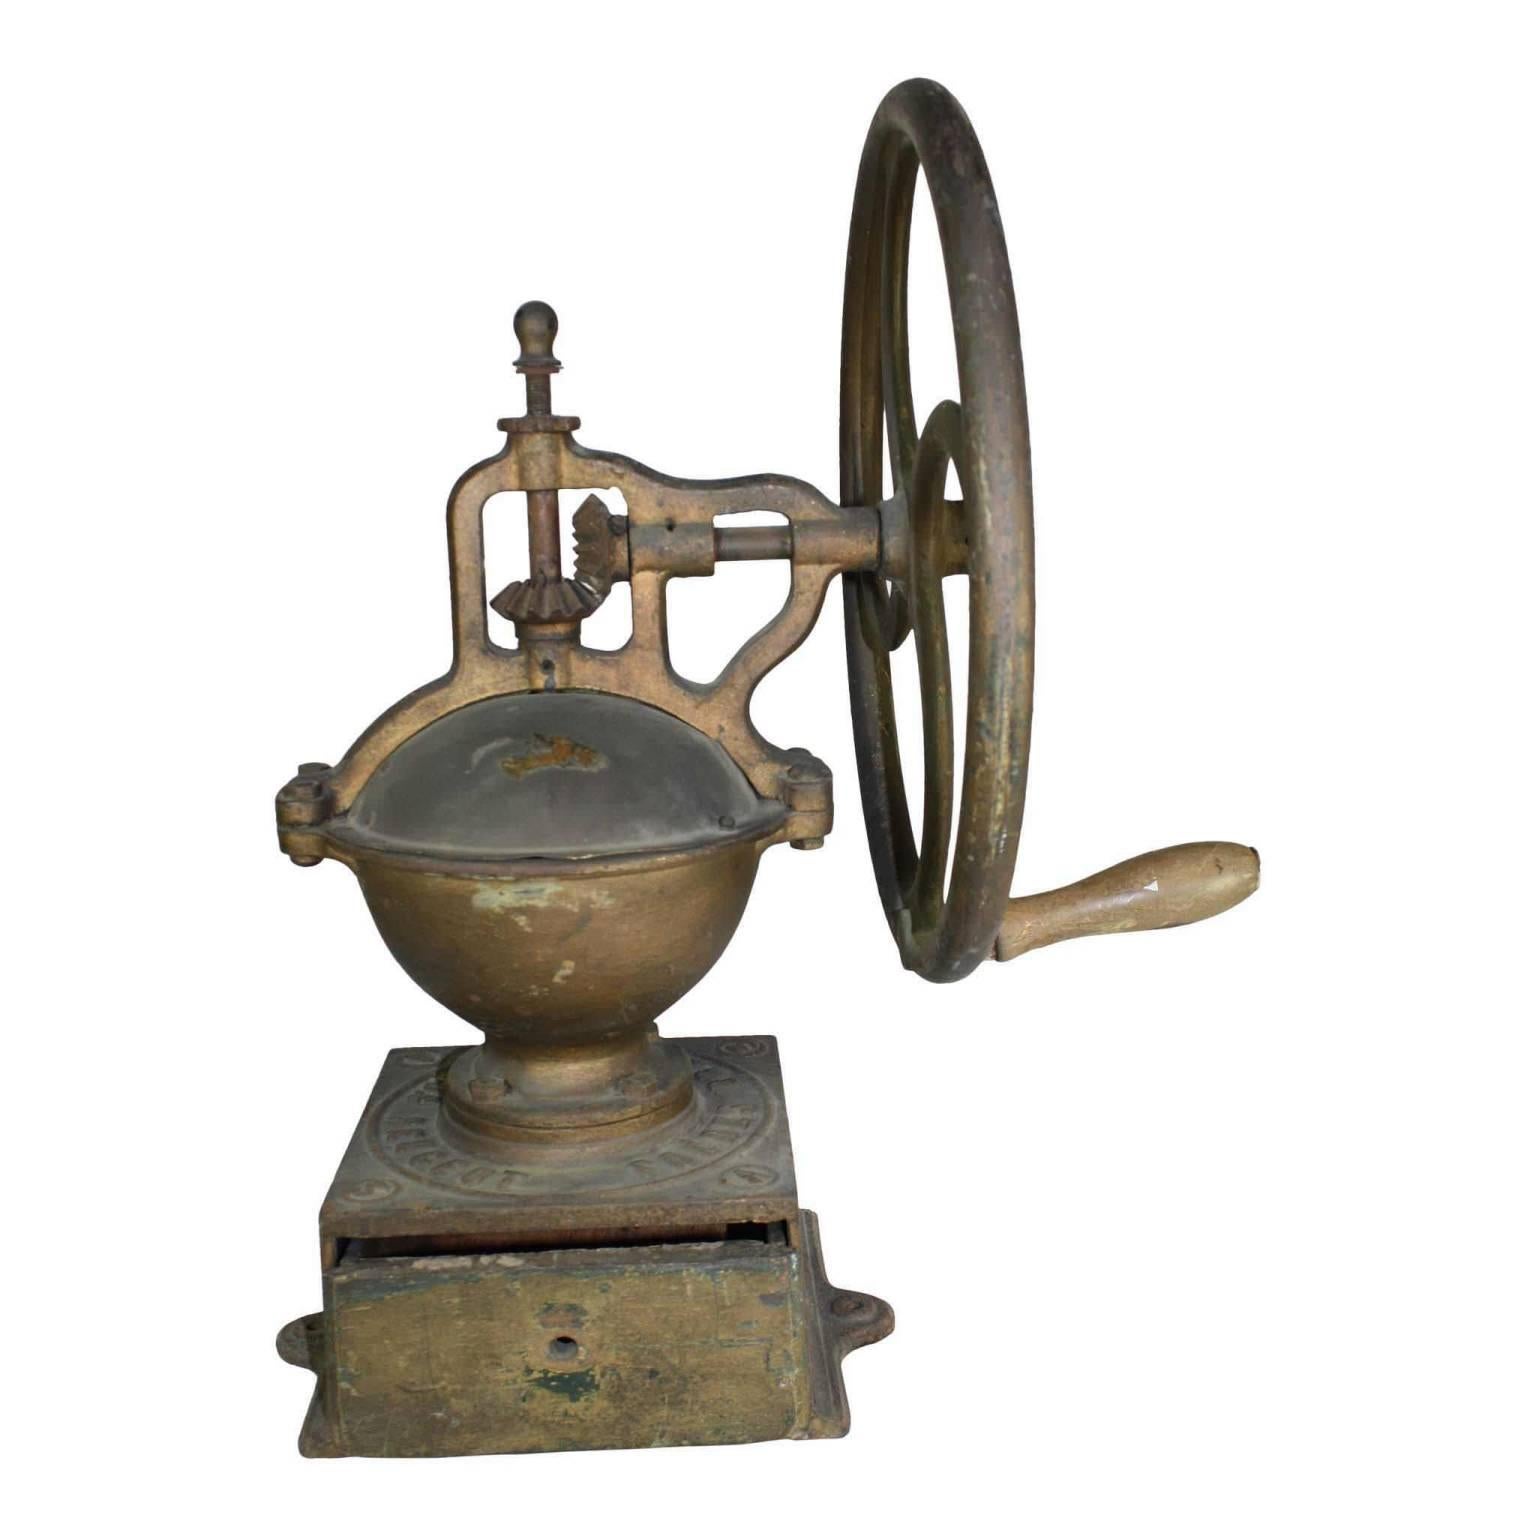 An early Industrial coffee grinder from the famed French manufacturer, Peugeot Freres. One of the larger of their cast iron wheels measures 15